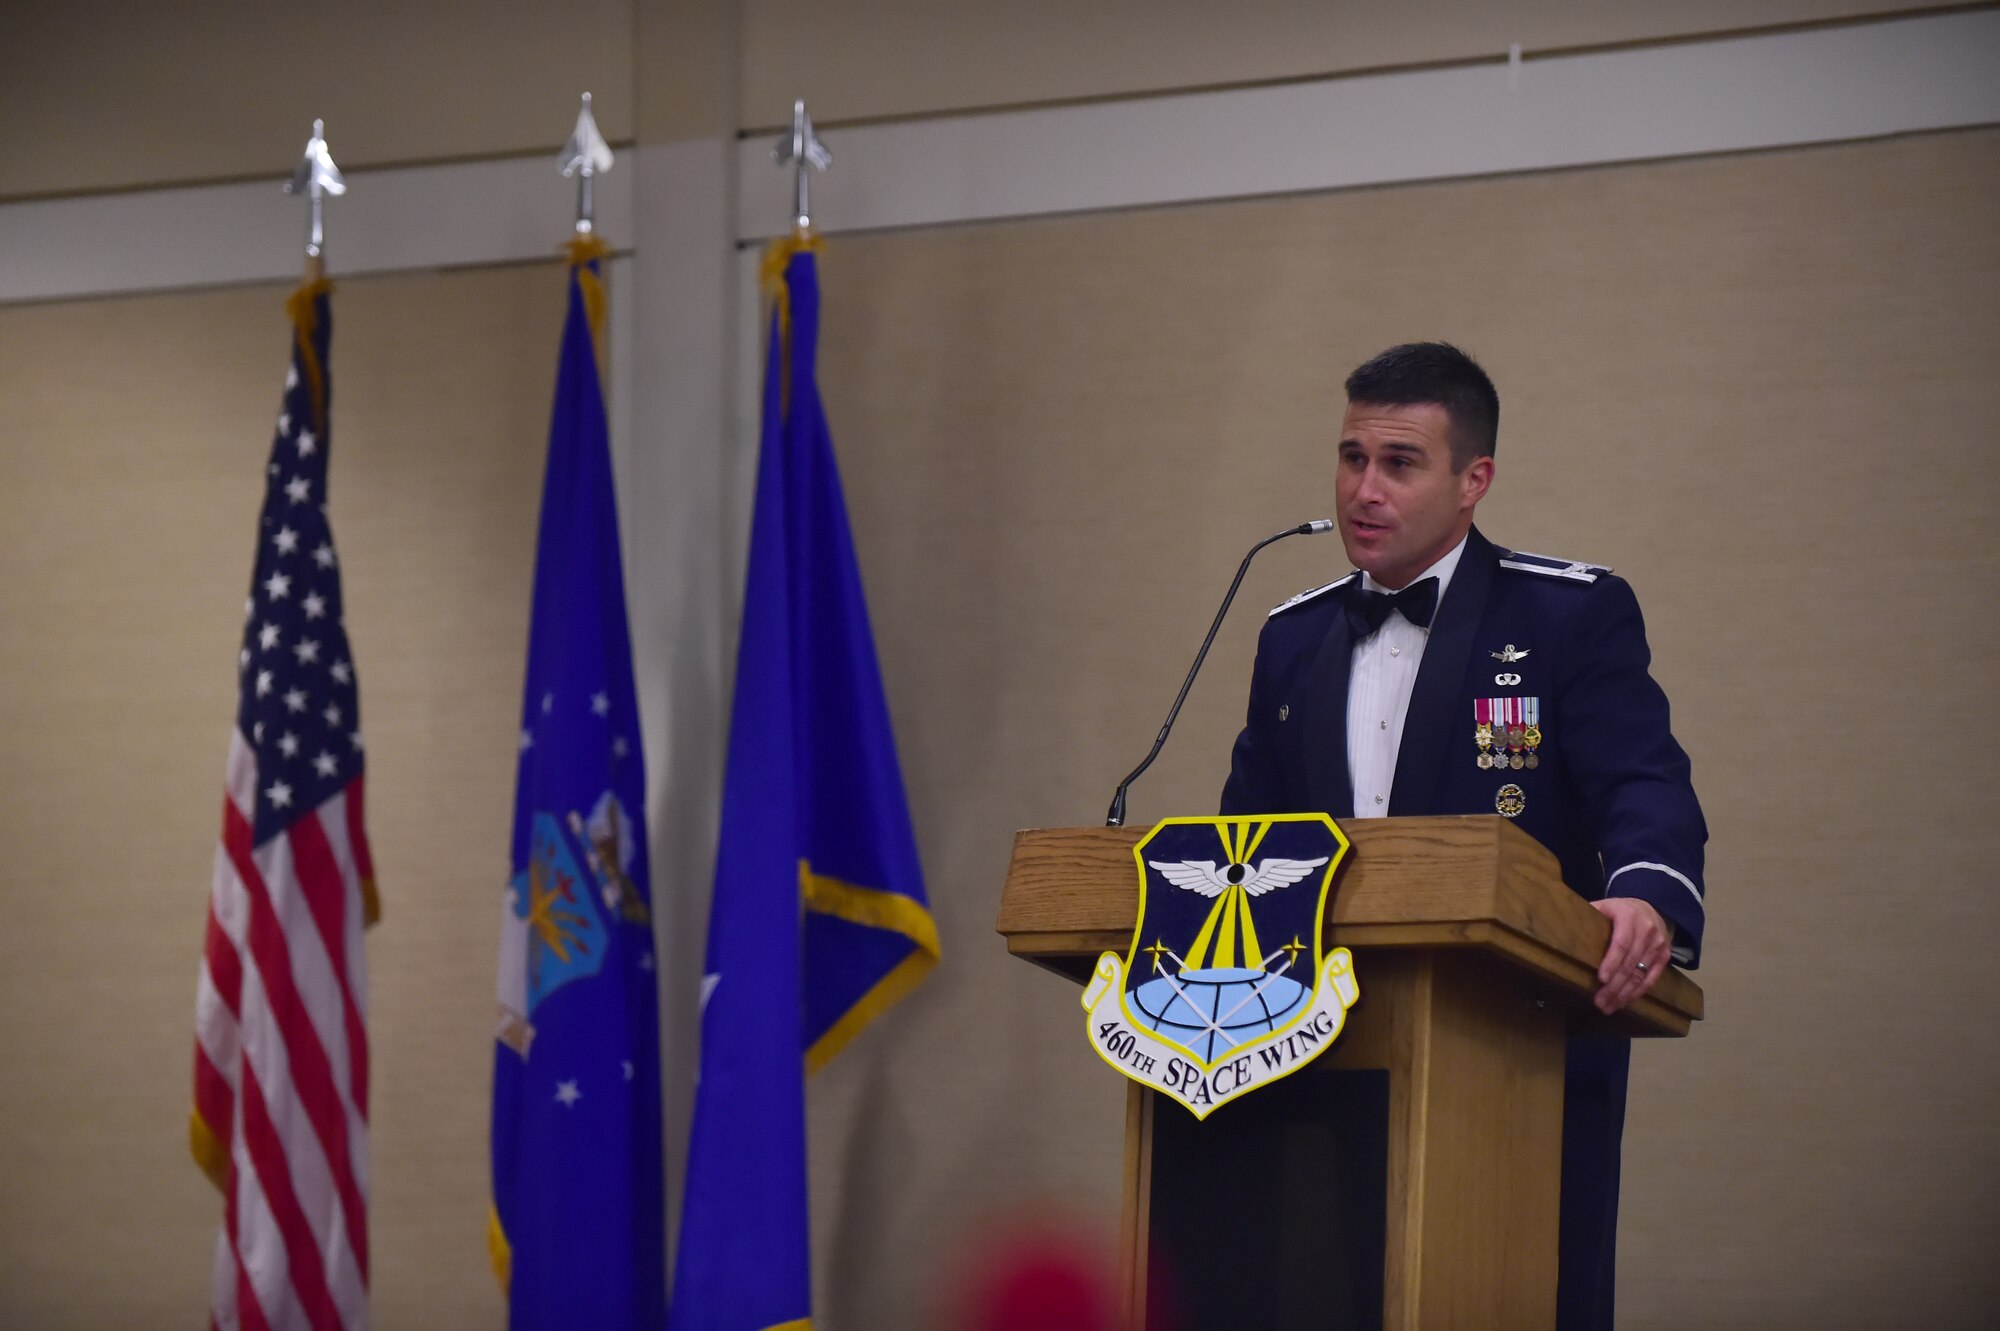 Col. John Wagner, 460th Space Wing commander, speaks at the Air Force Ball Sept. 25, 2015, at the Westin in Denver.  Team Buckley held an annual ball to celebrate the 68th birthday of the Air Force. (U.S. Air Force photo by Airman 1st Class Luke W. Nowakowski/Released)